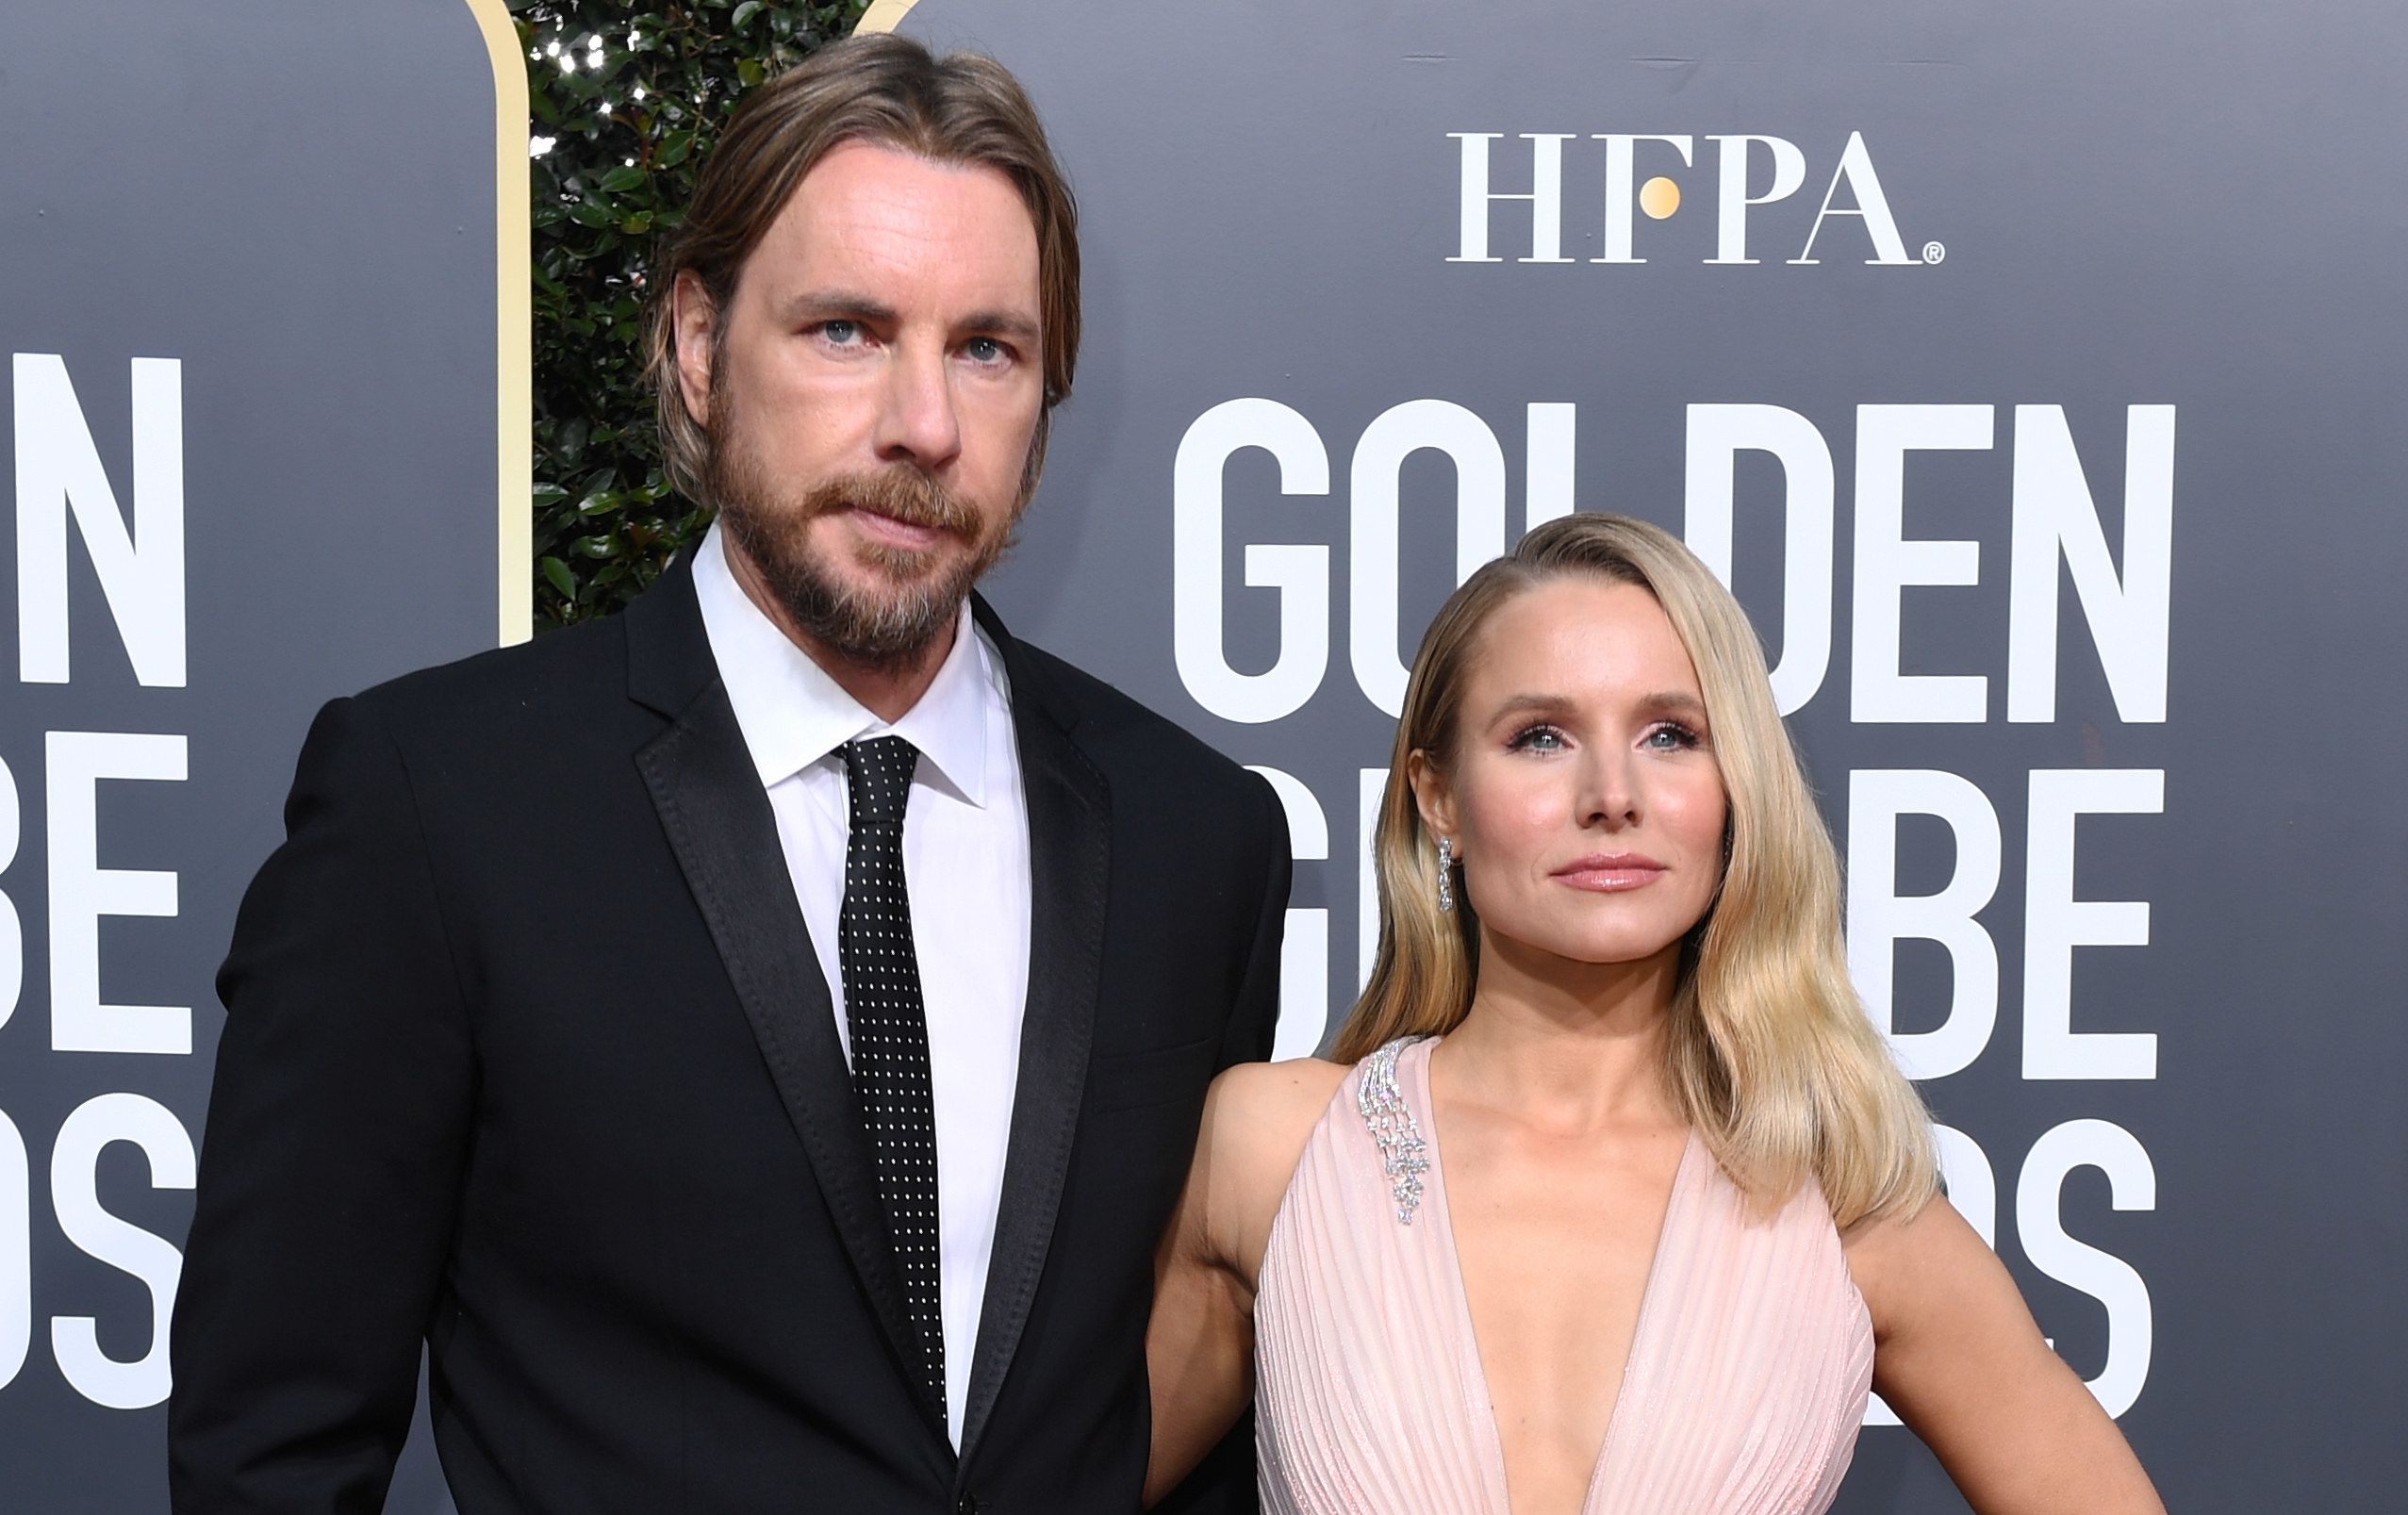 Kristen Bell and Dax Shepard at the 76th Golden Globe Awards